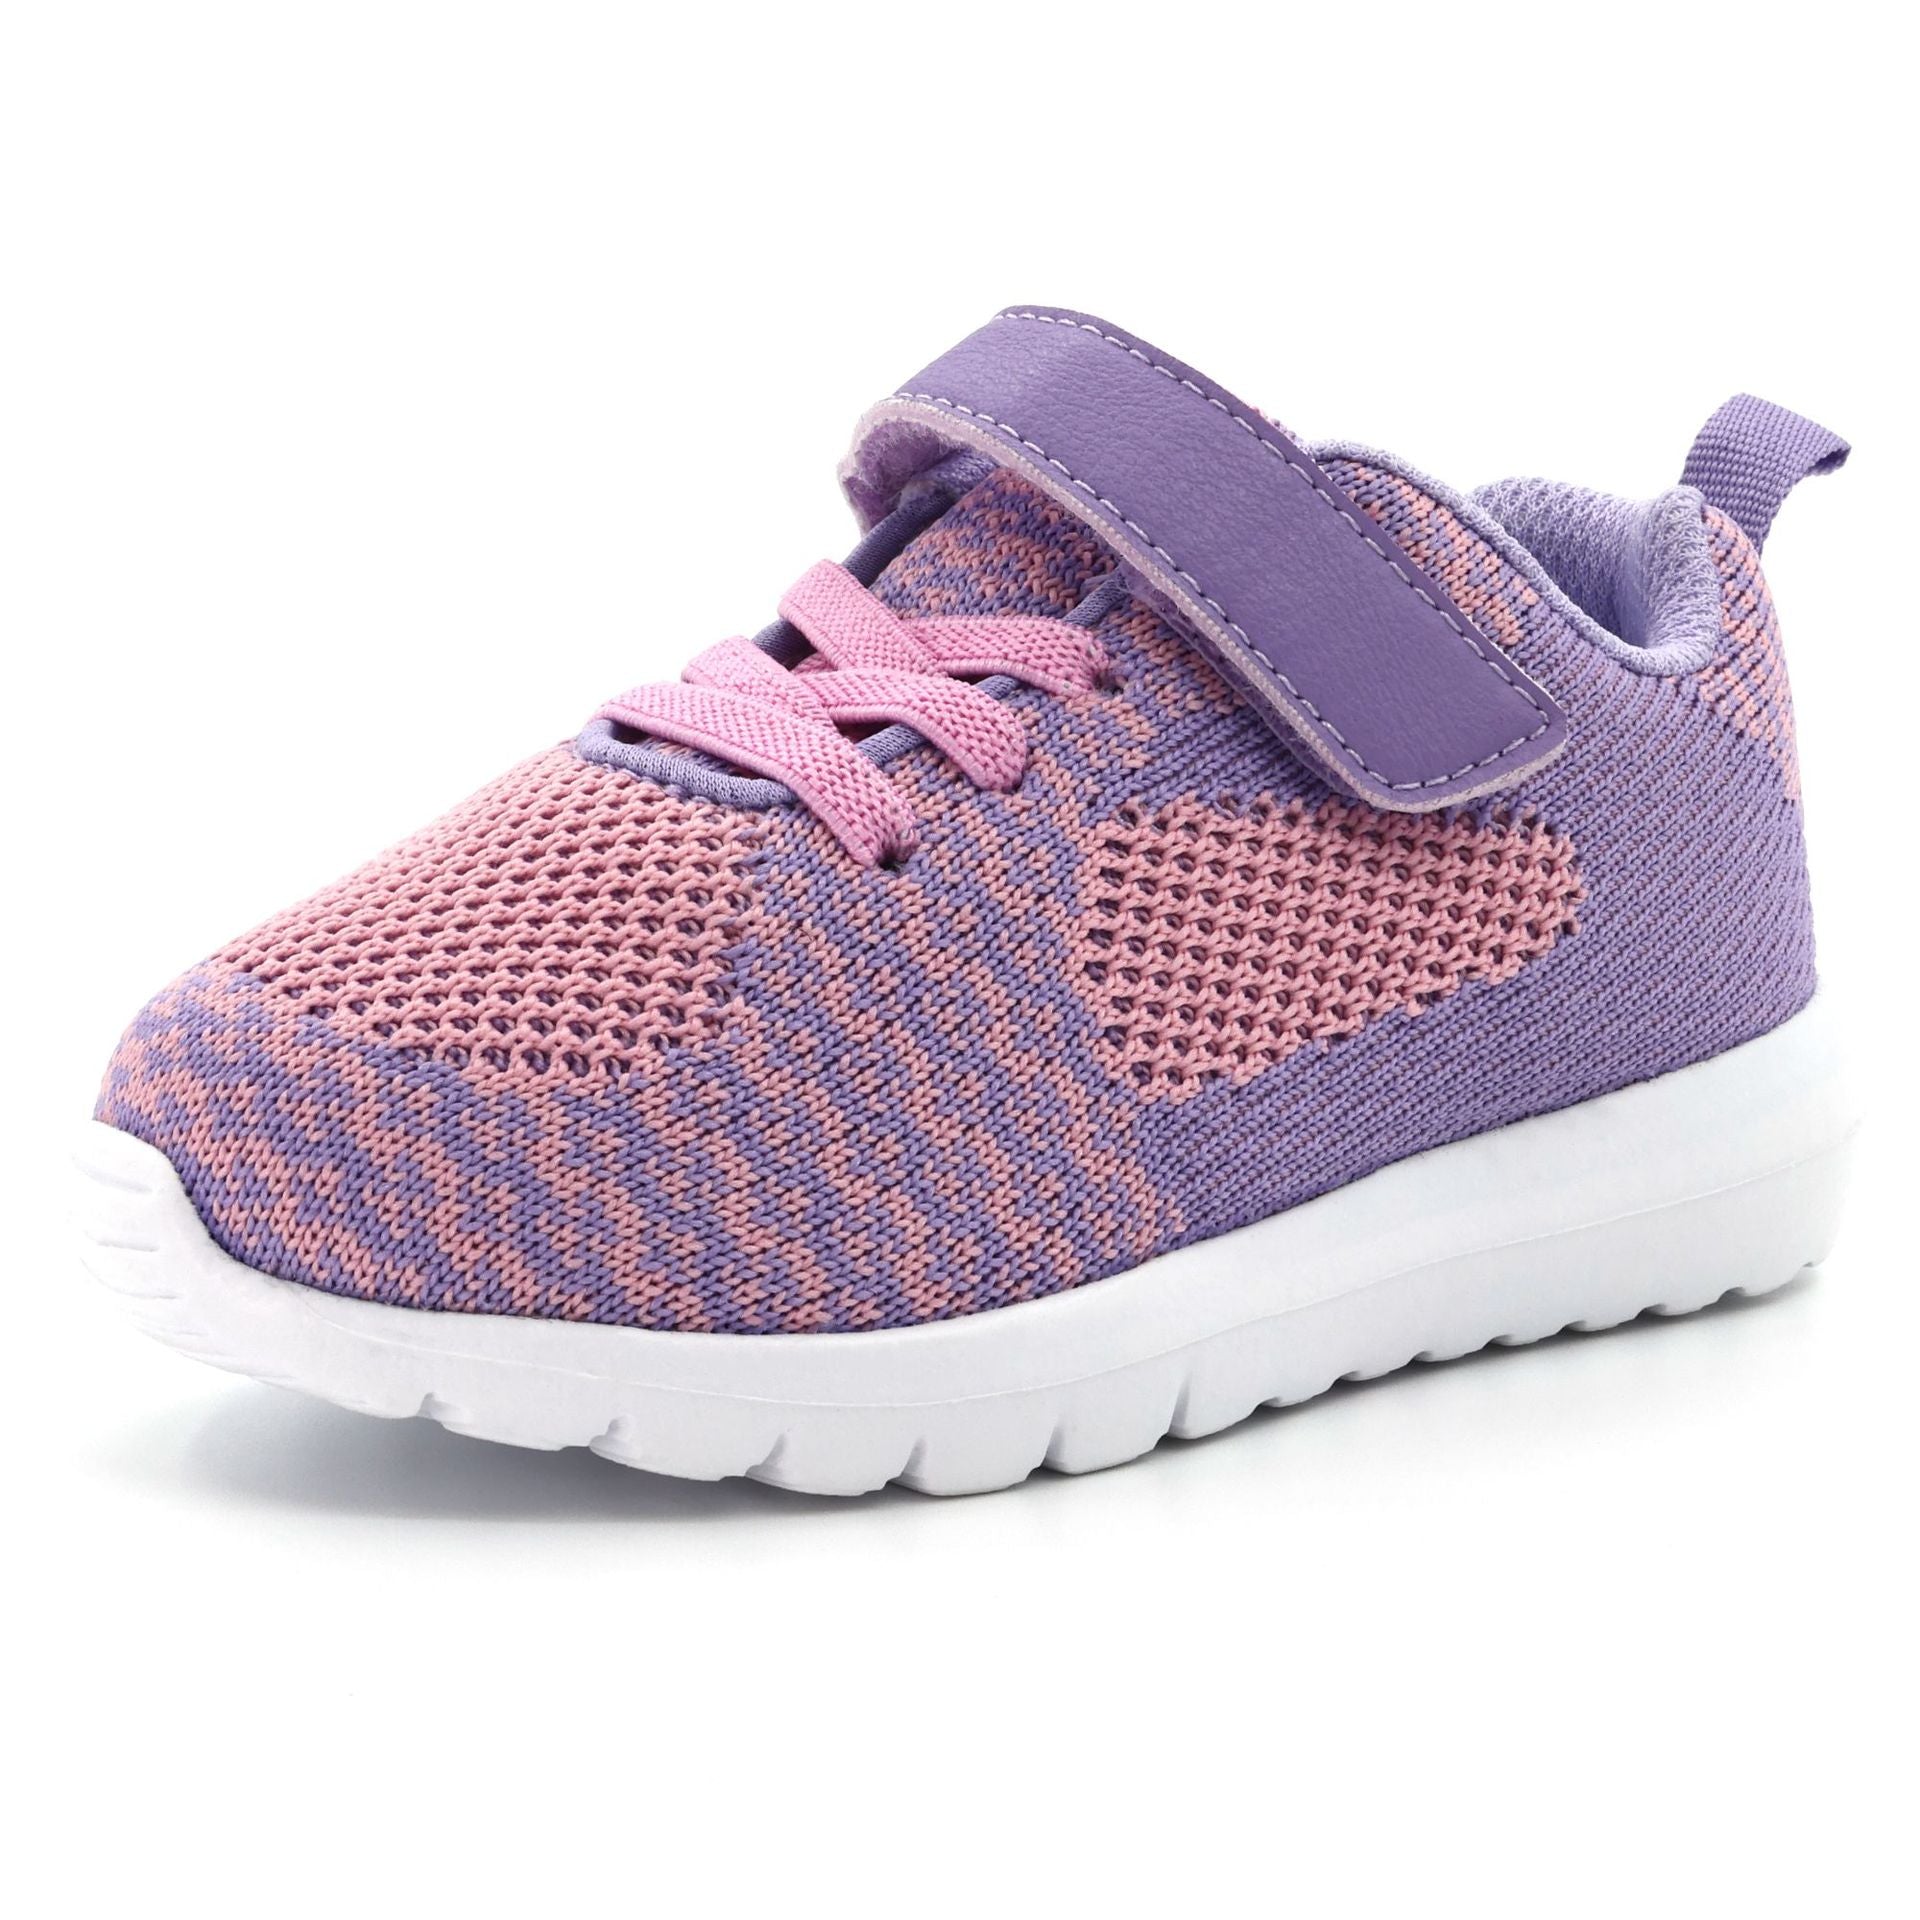 Pure Color Velcro Sneakers Lightweight Running Shoes For Boys And Girls